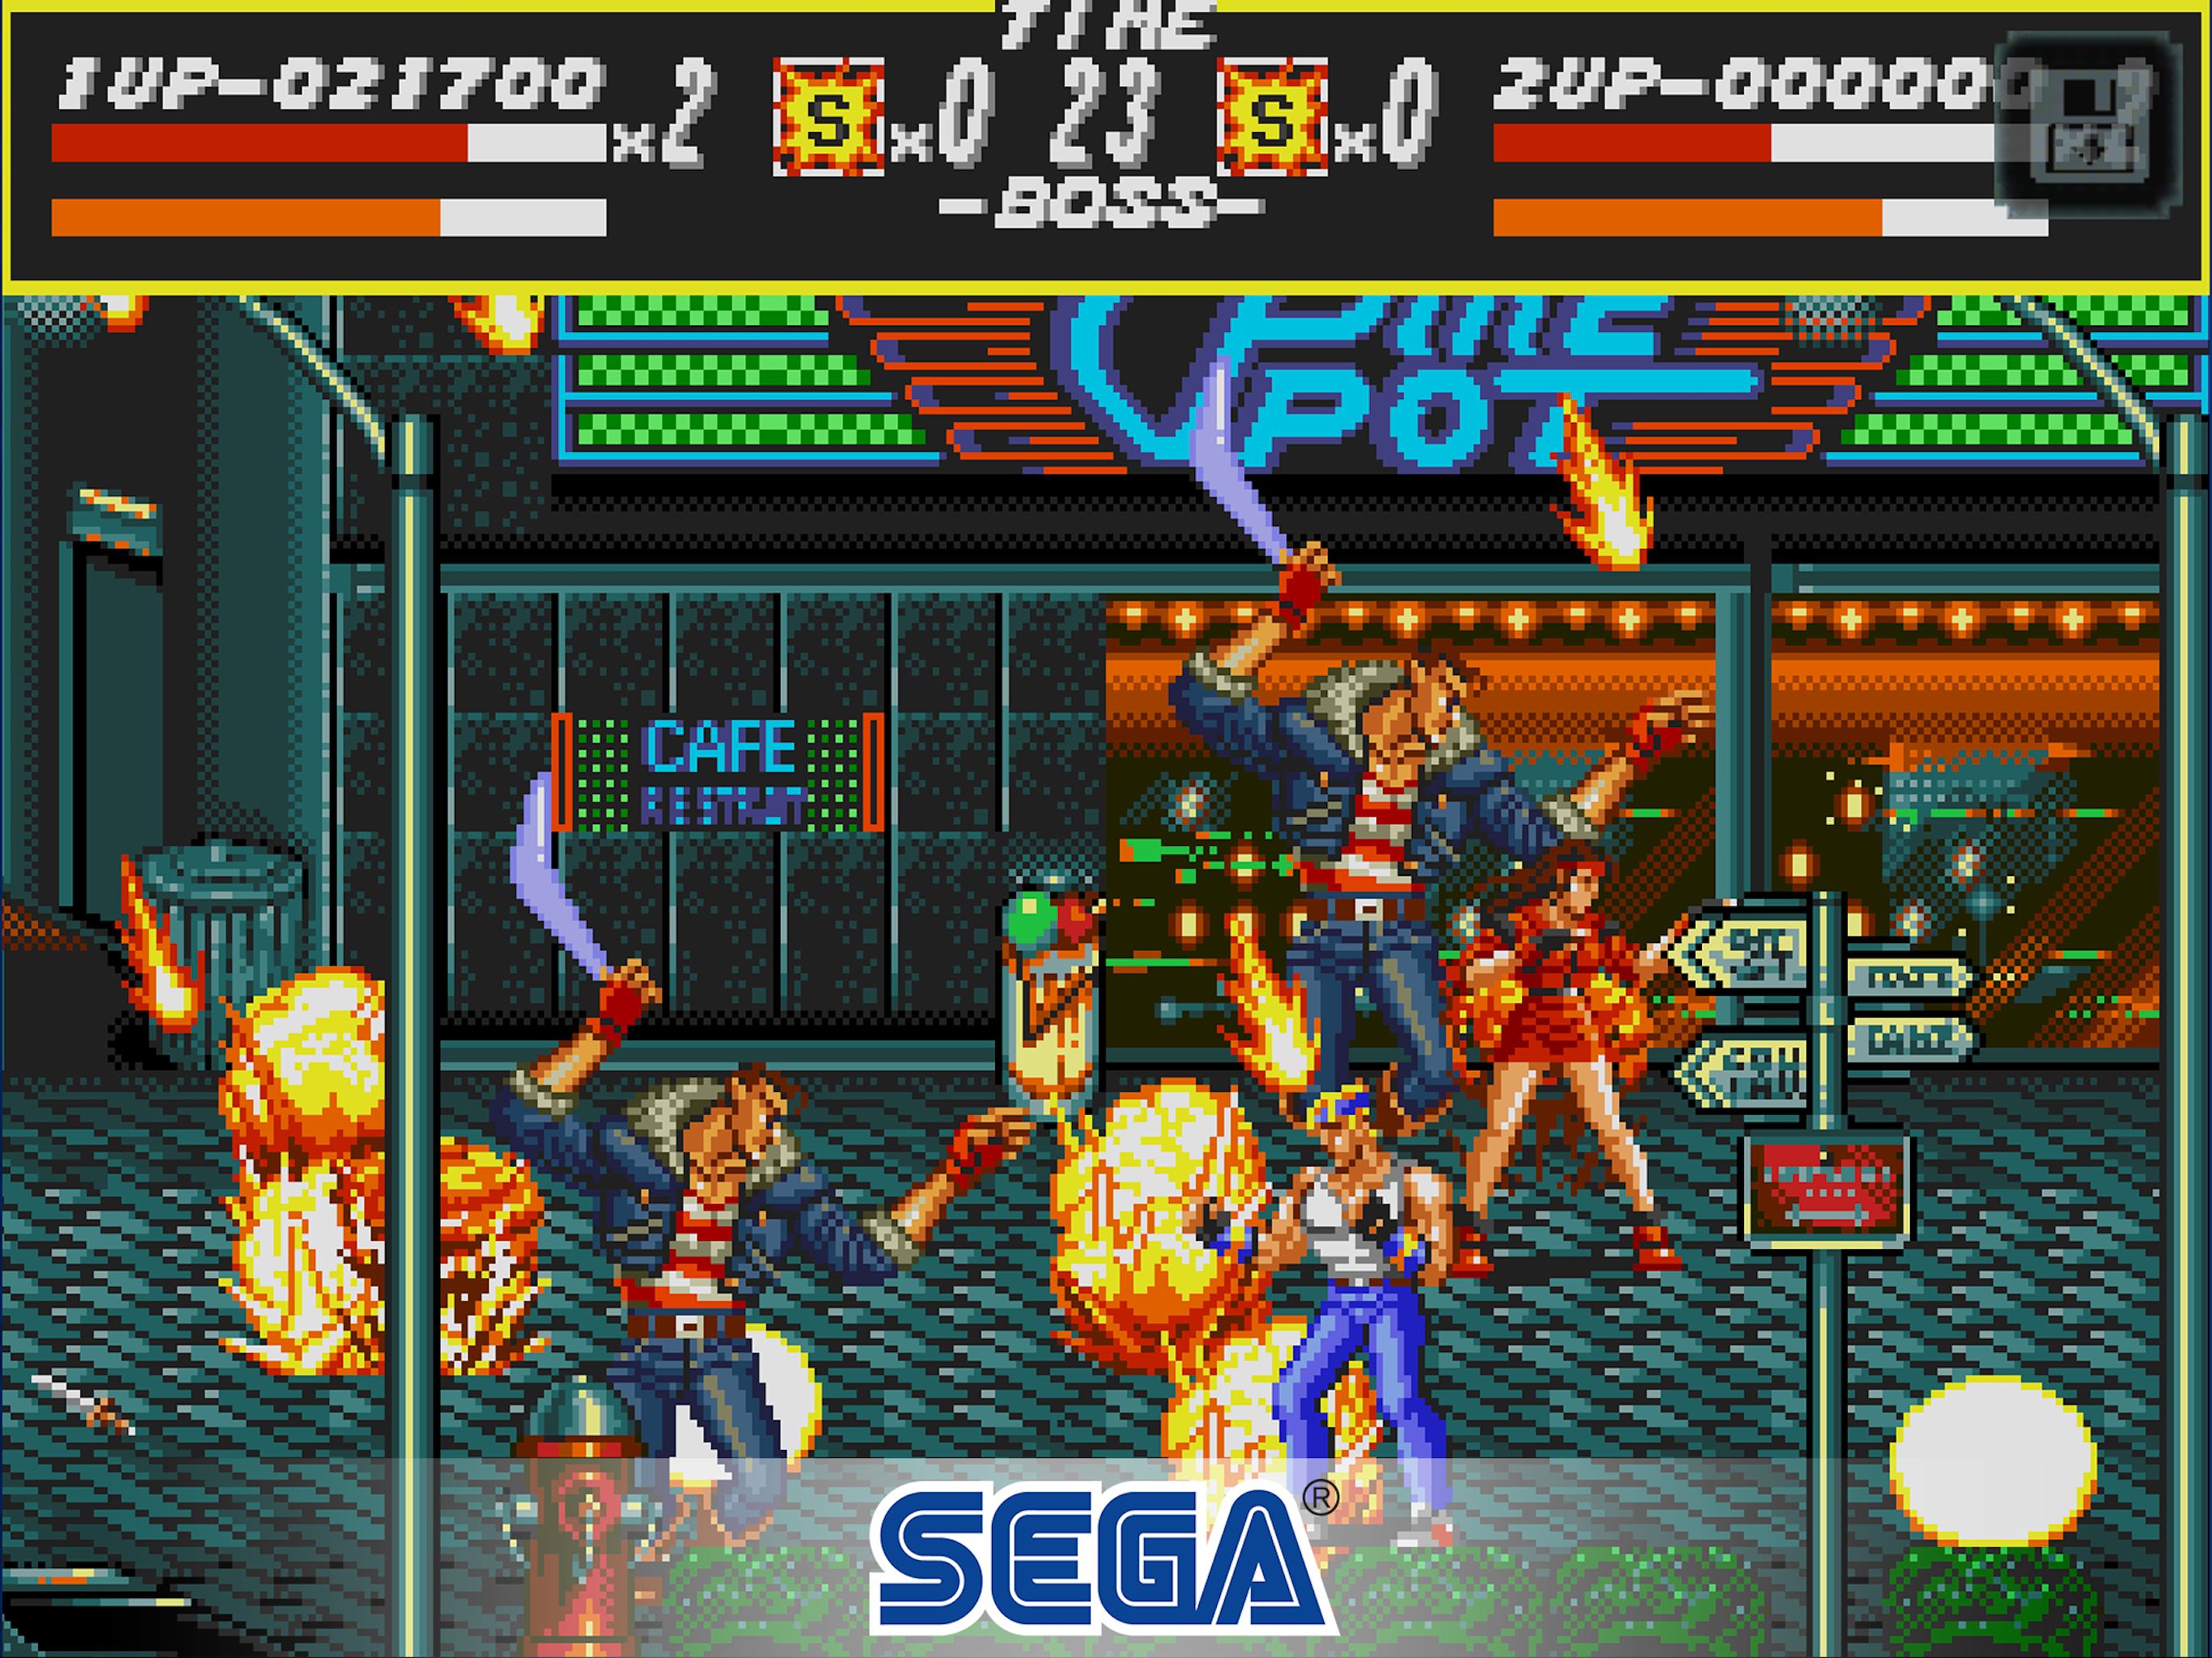 best-beat-em-up-games-streets-of-rage-classic-axel-and-blaze-fighting